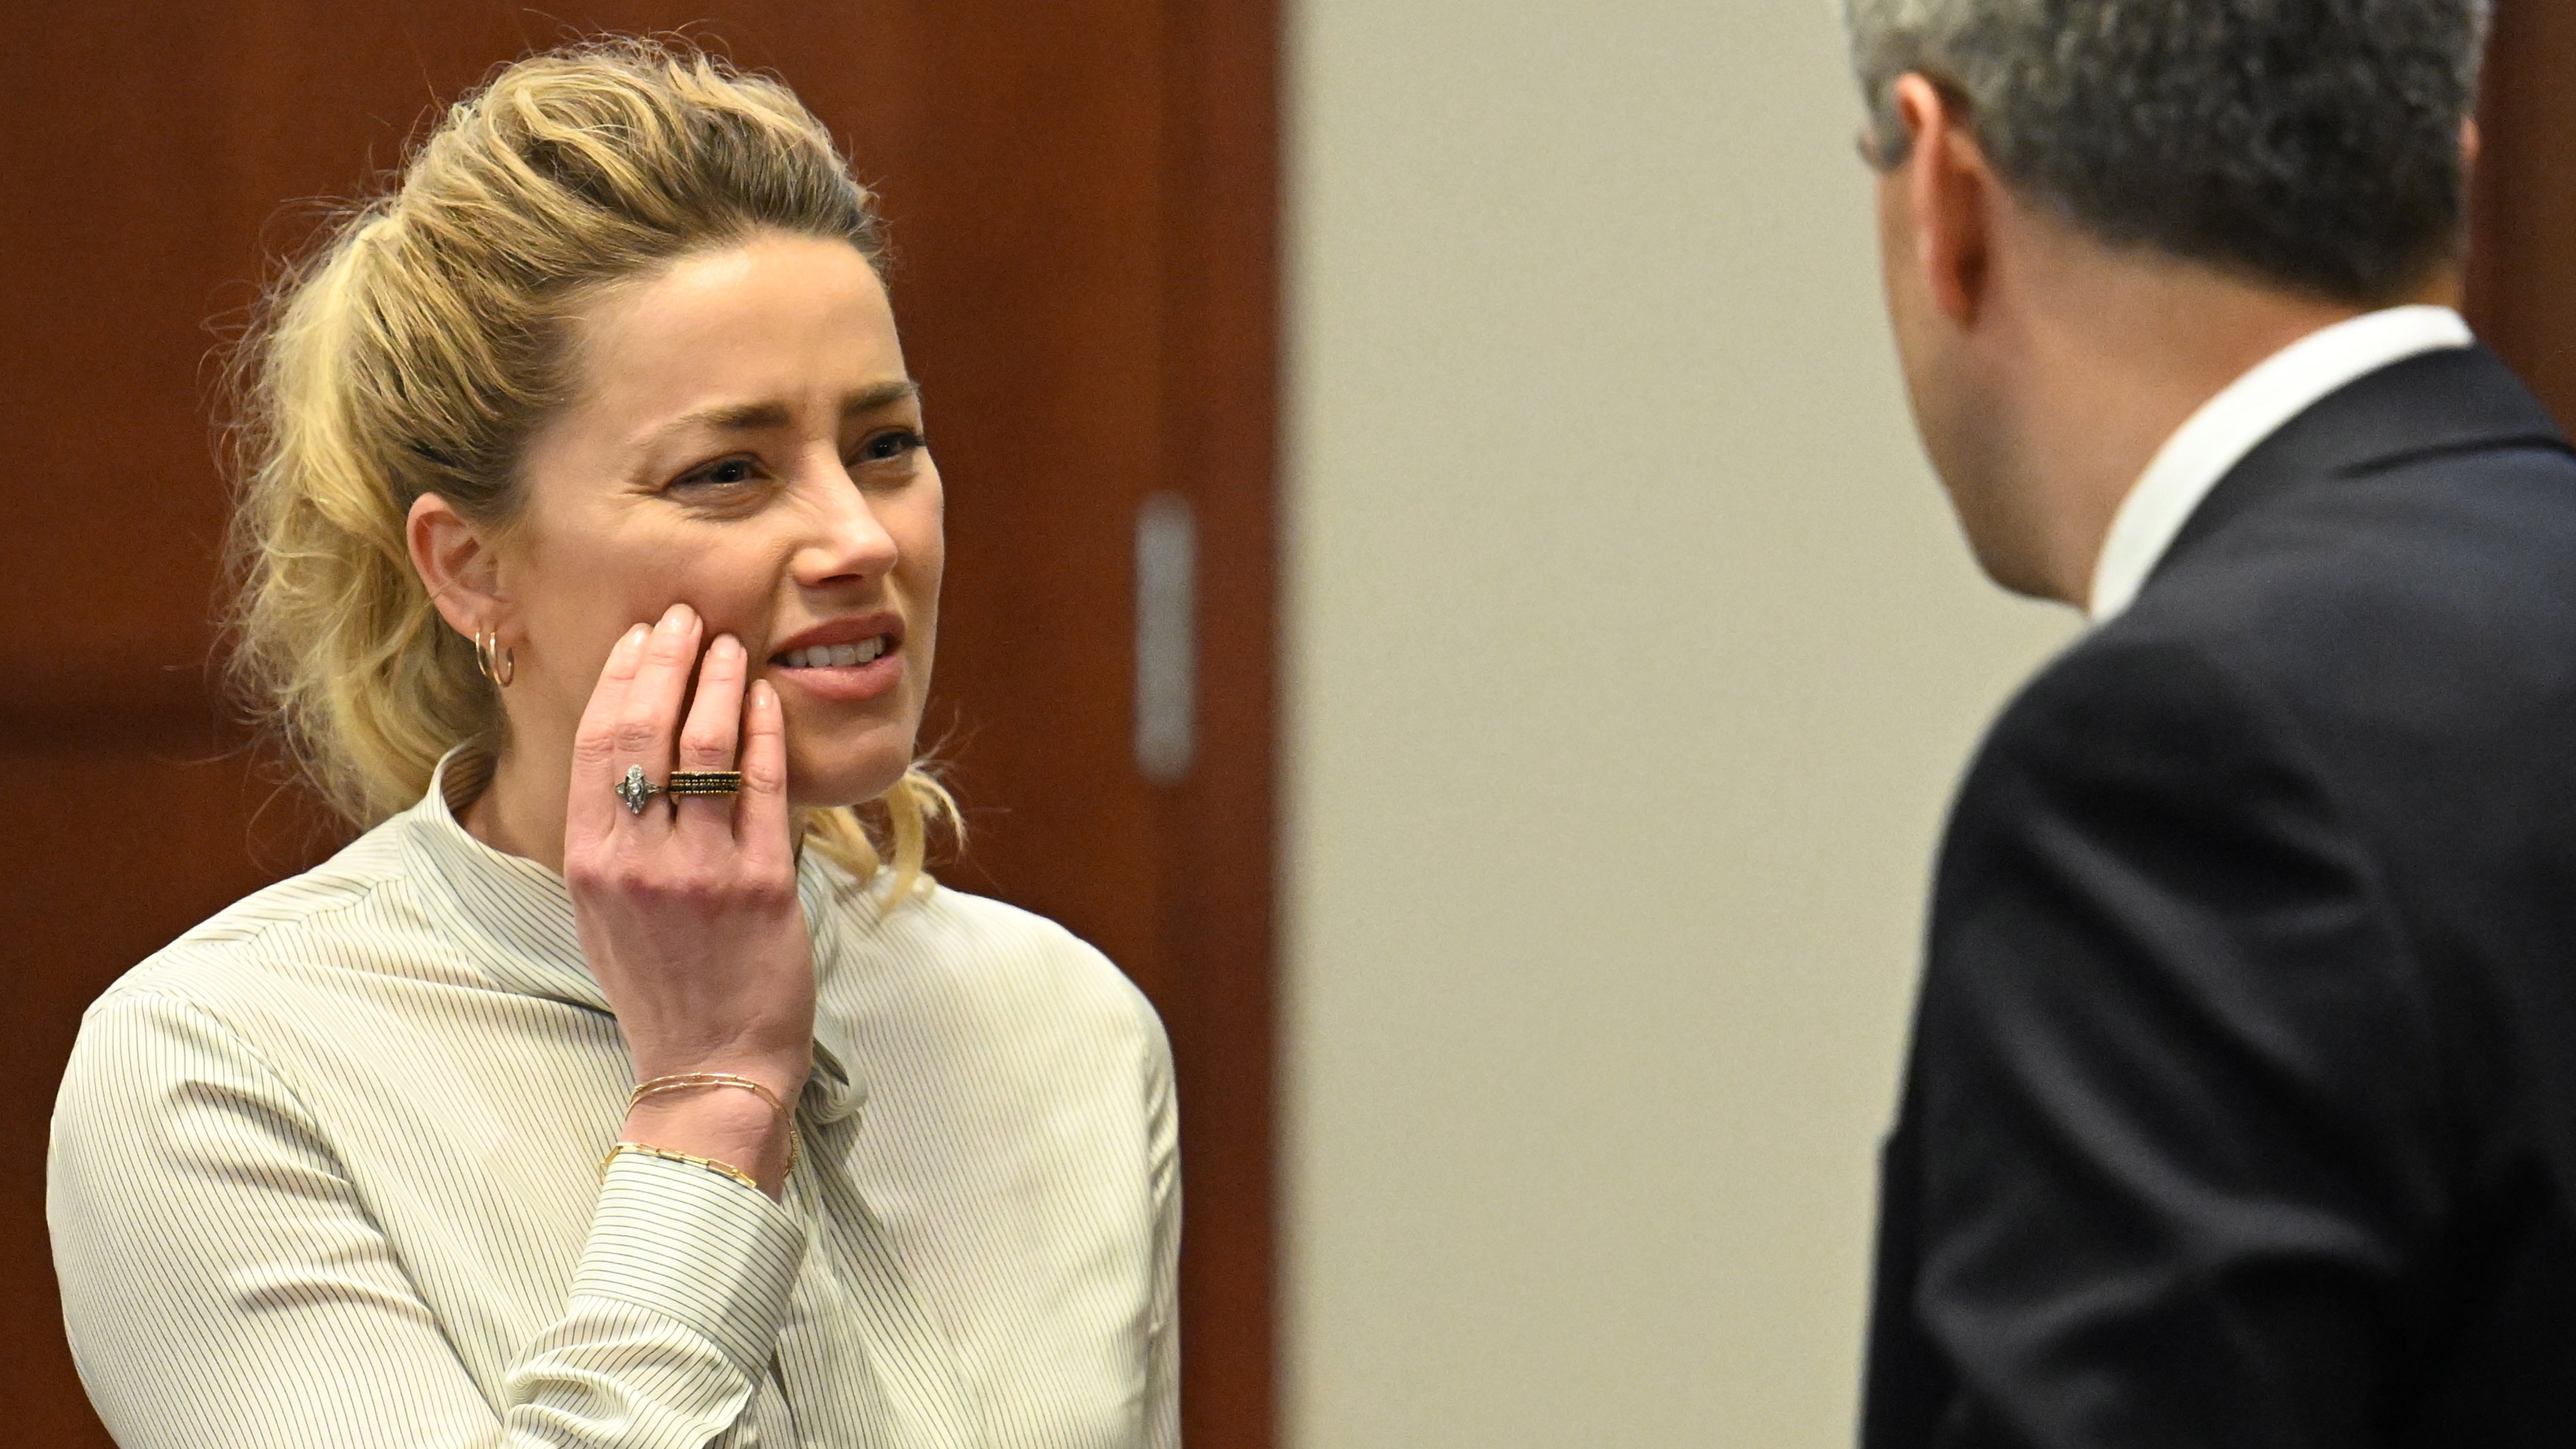 US actress Amber Heard looks on during a trial in the Fairfax County Circuit Courthouse in Fairfax, Virginia, USA, 19 April 2022